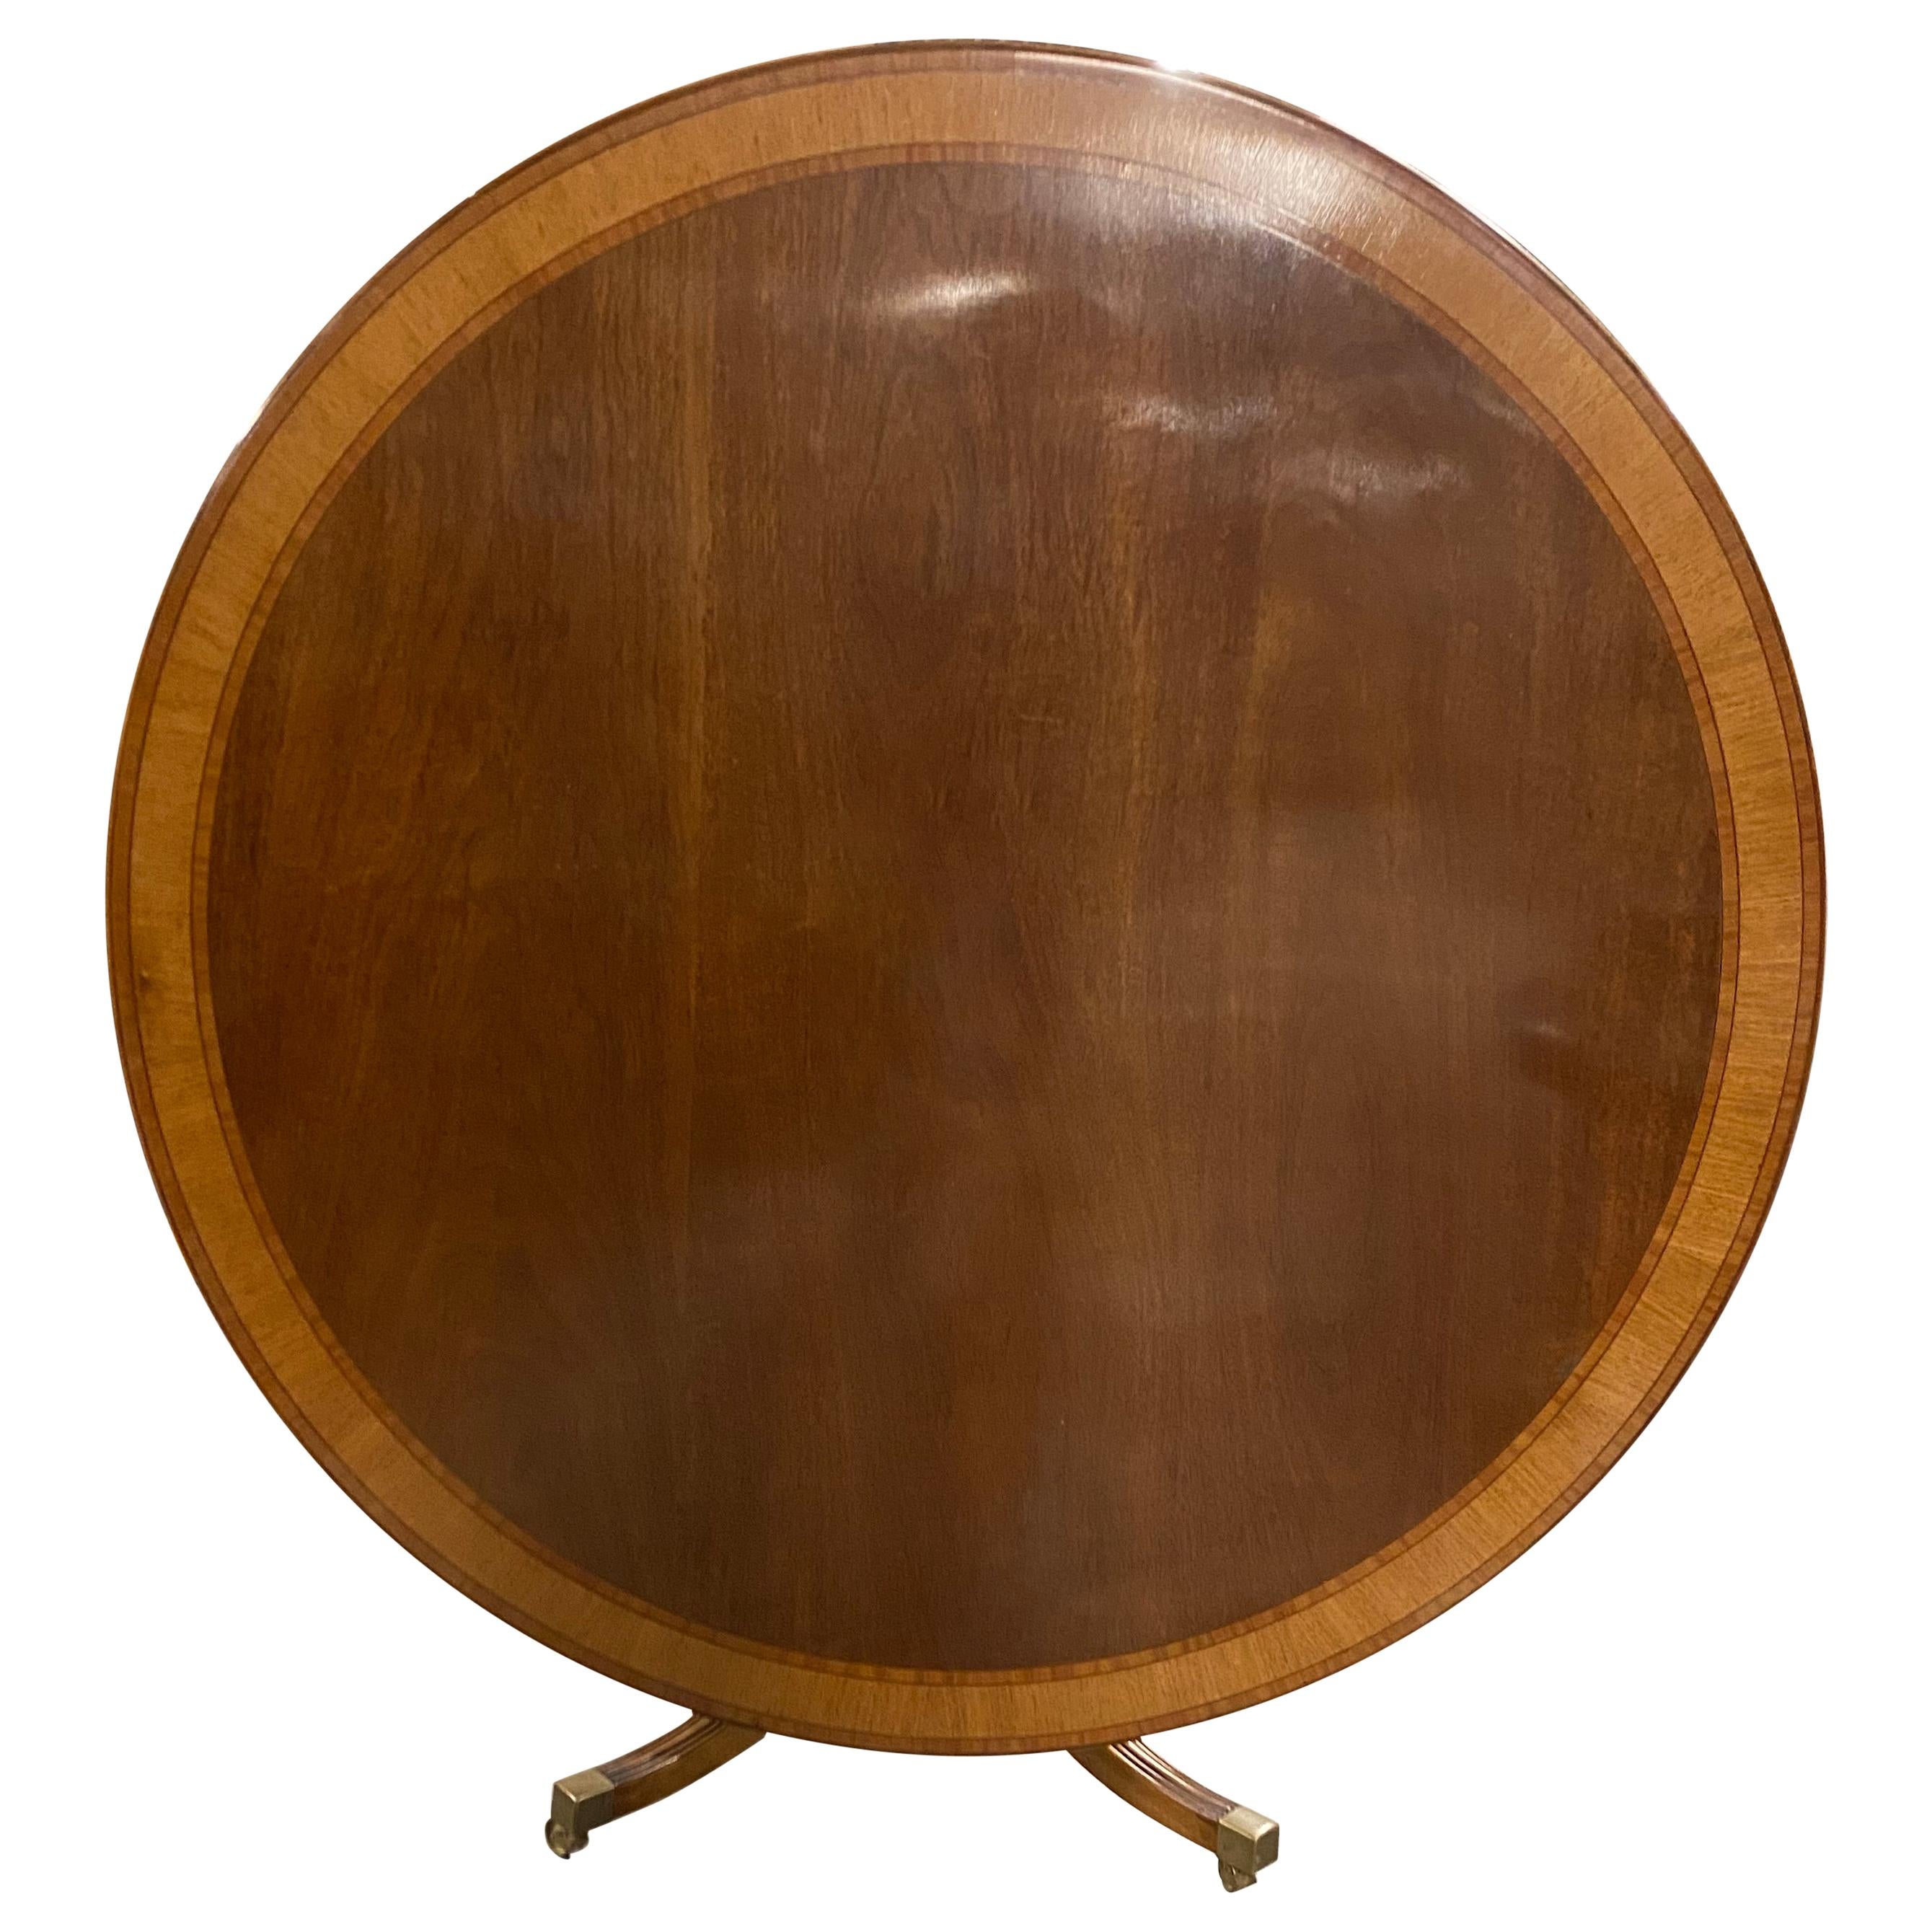 Regency Style Round Tilt-Top Table, Banded Mahogany, Made in England